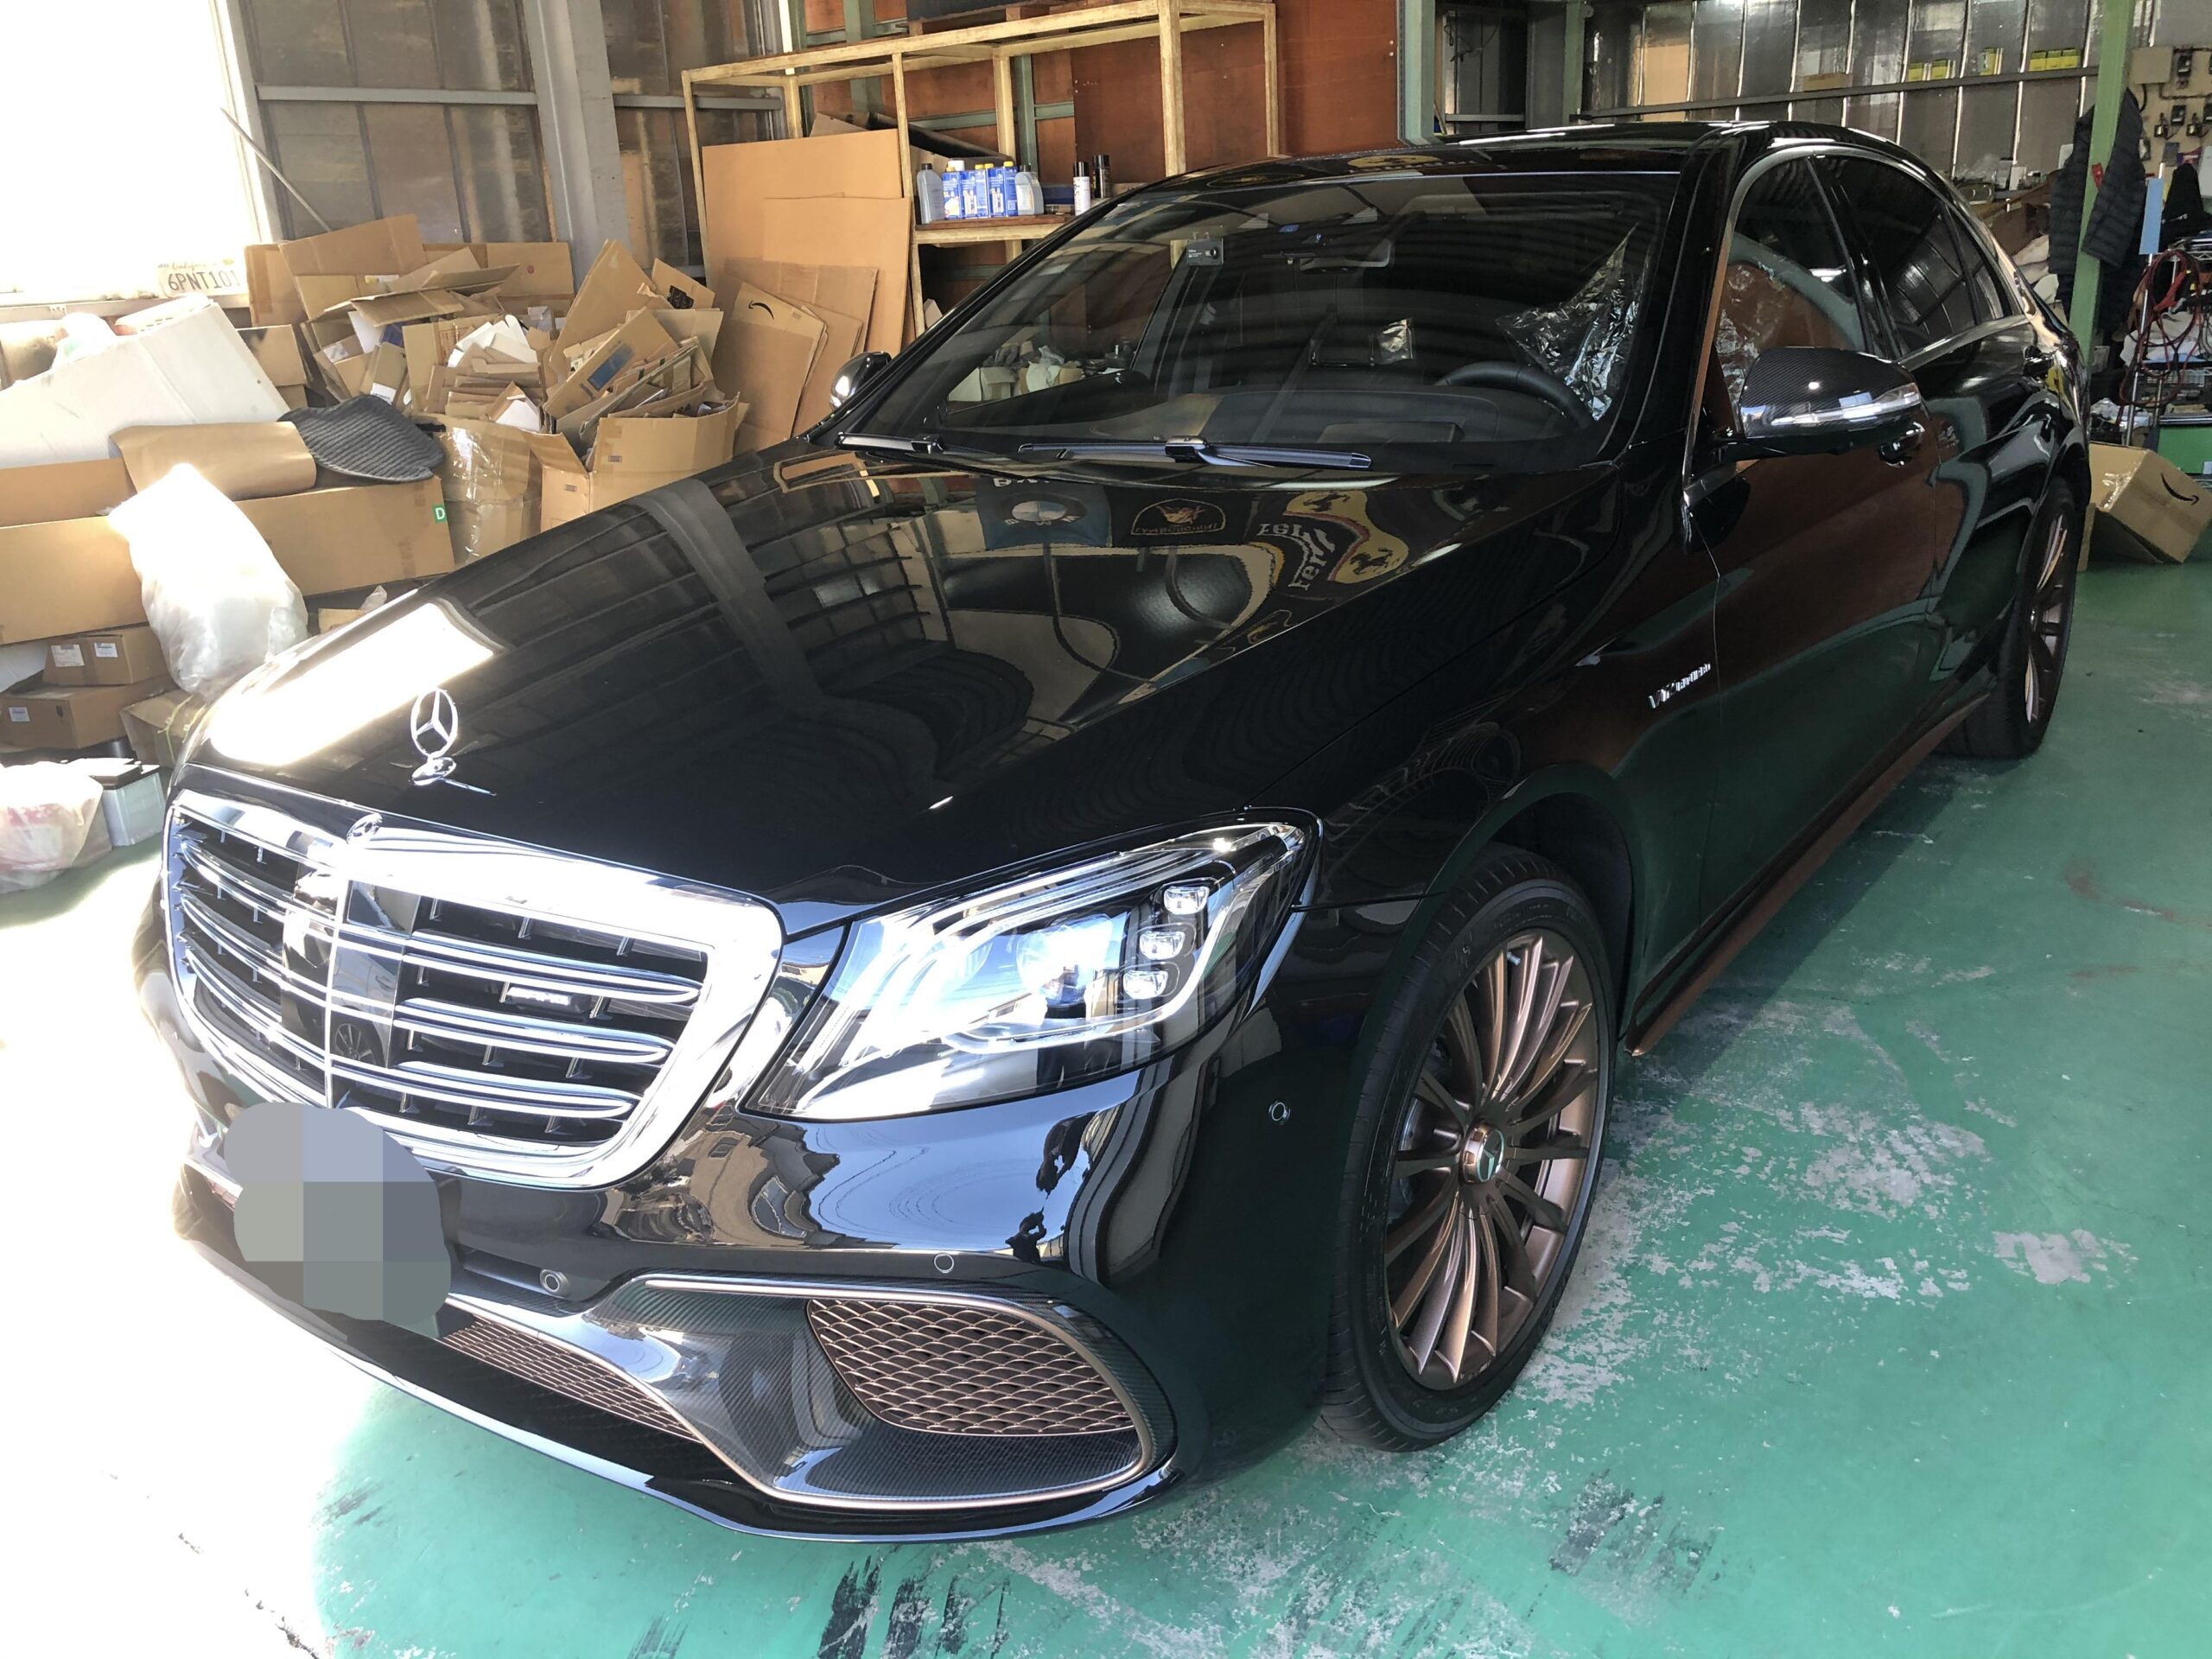 Mercedes Benz メルセデスベンツ S65 AMG Final Edition EXE-2000施工